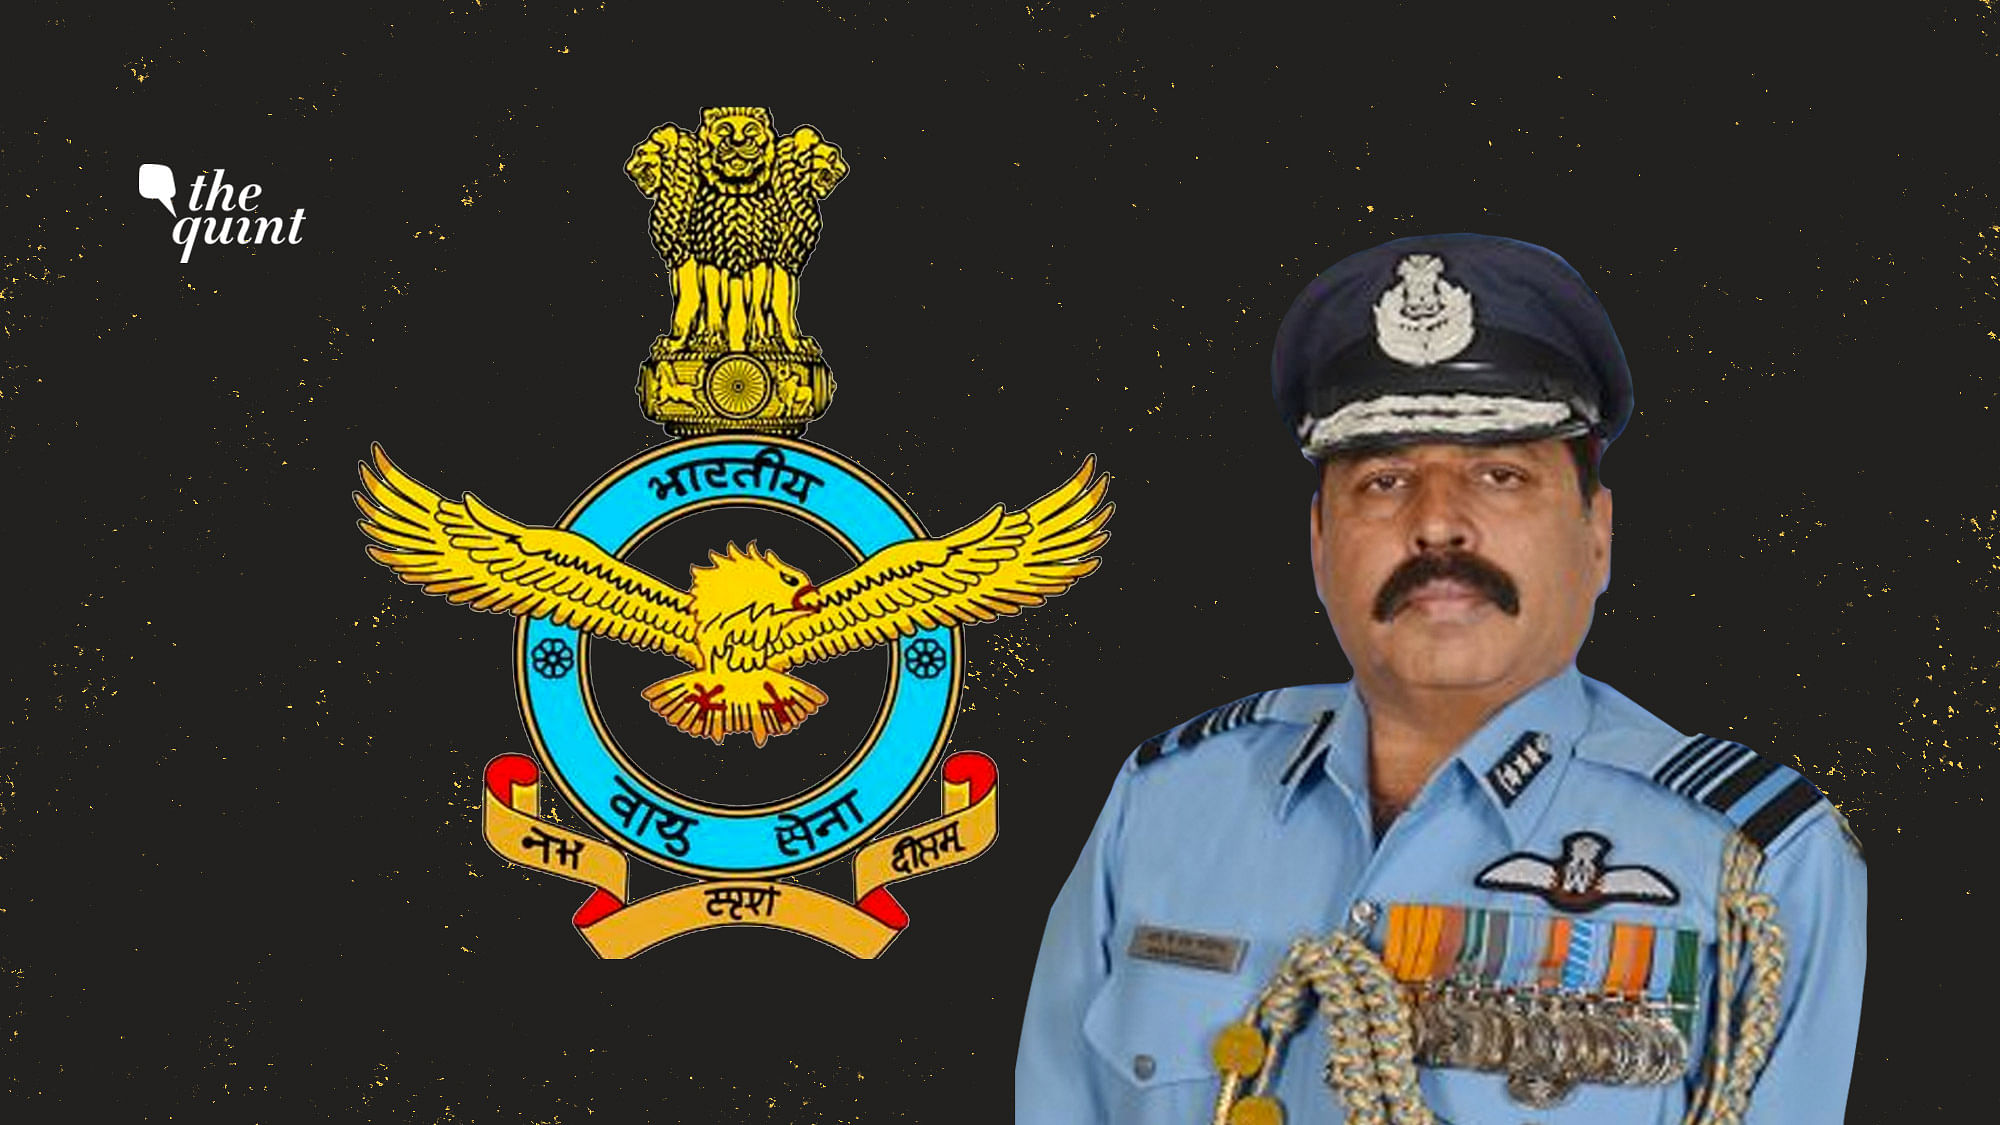 Image of Air Marshal Rakesh Kumar Singh Bhadauria who will take over as the 26th Chief of Indian Air Force (IAF), on 30 September, and IAF logo, used for representational purposes.